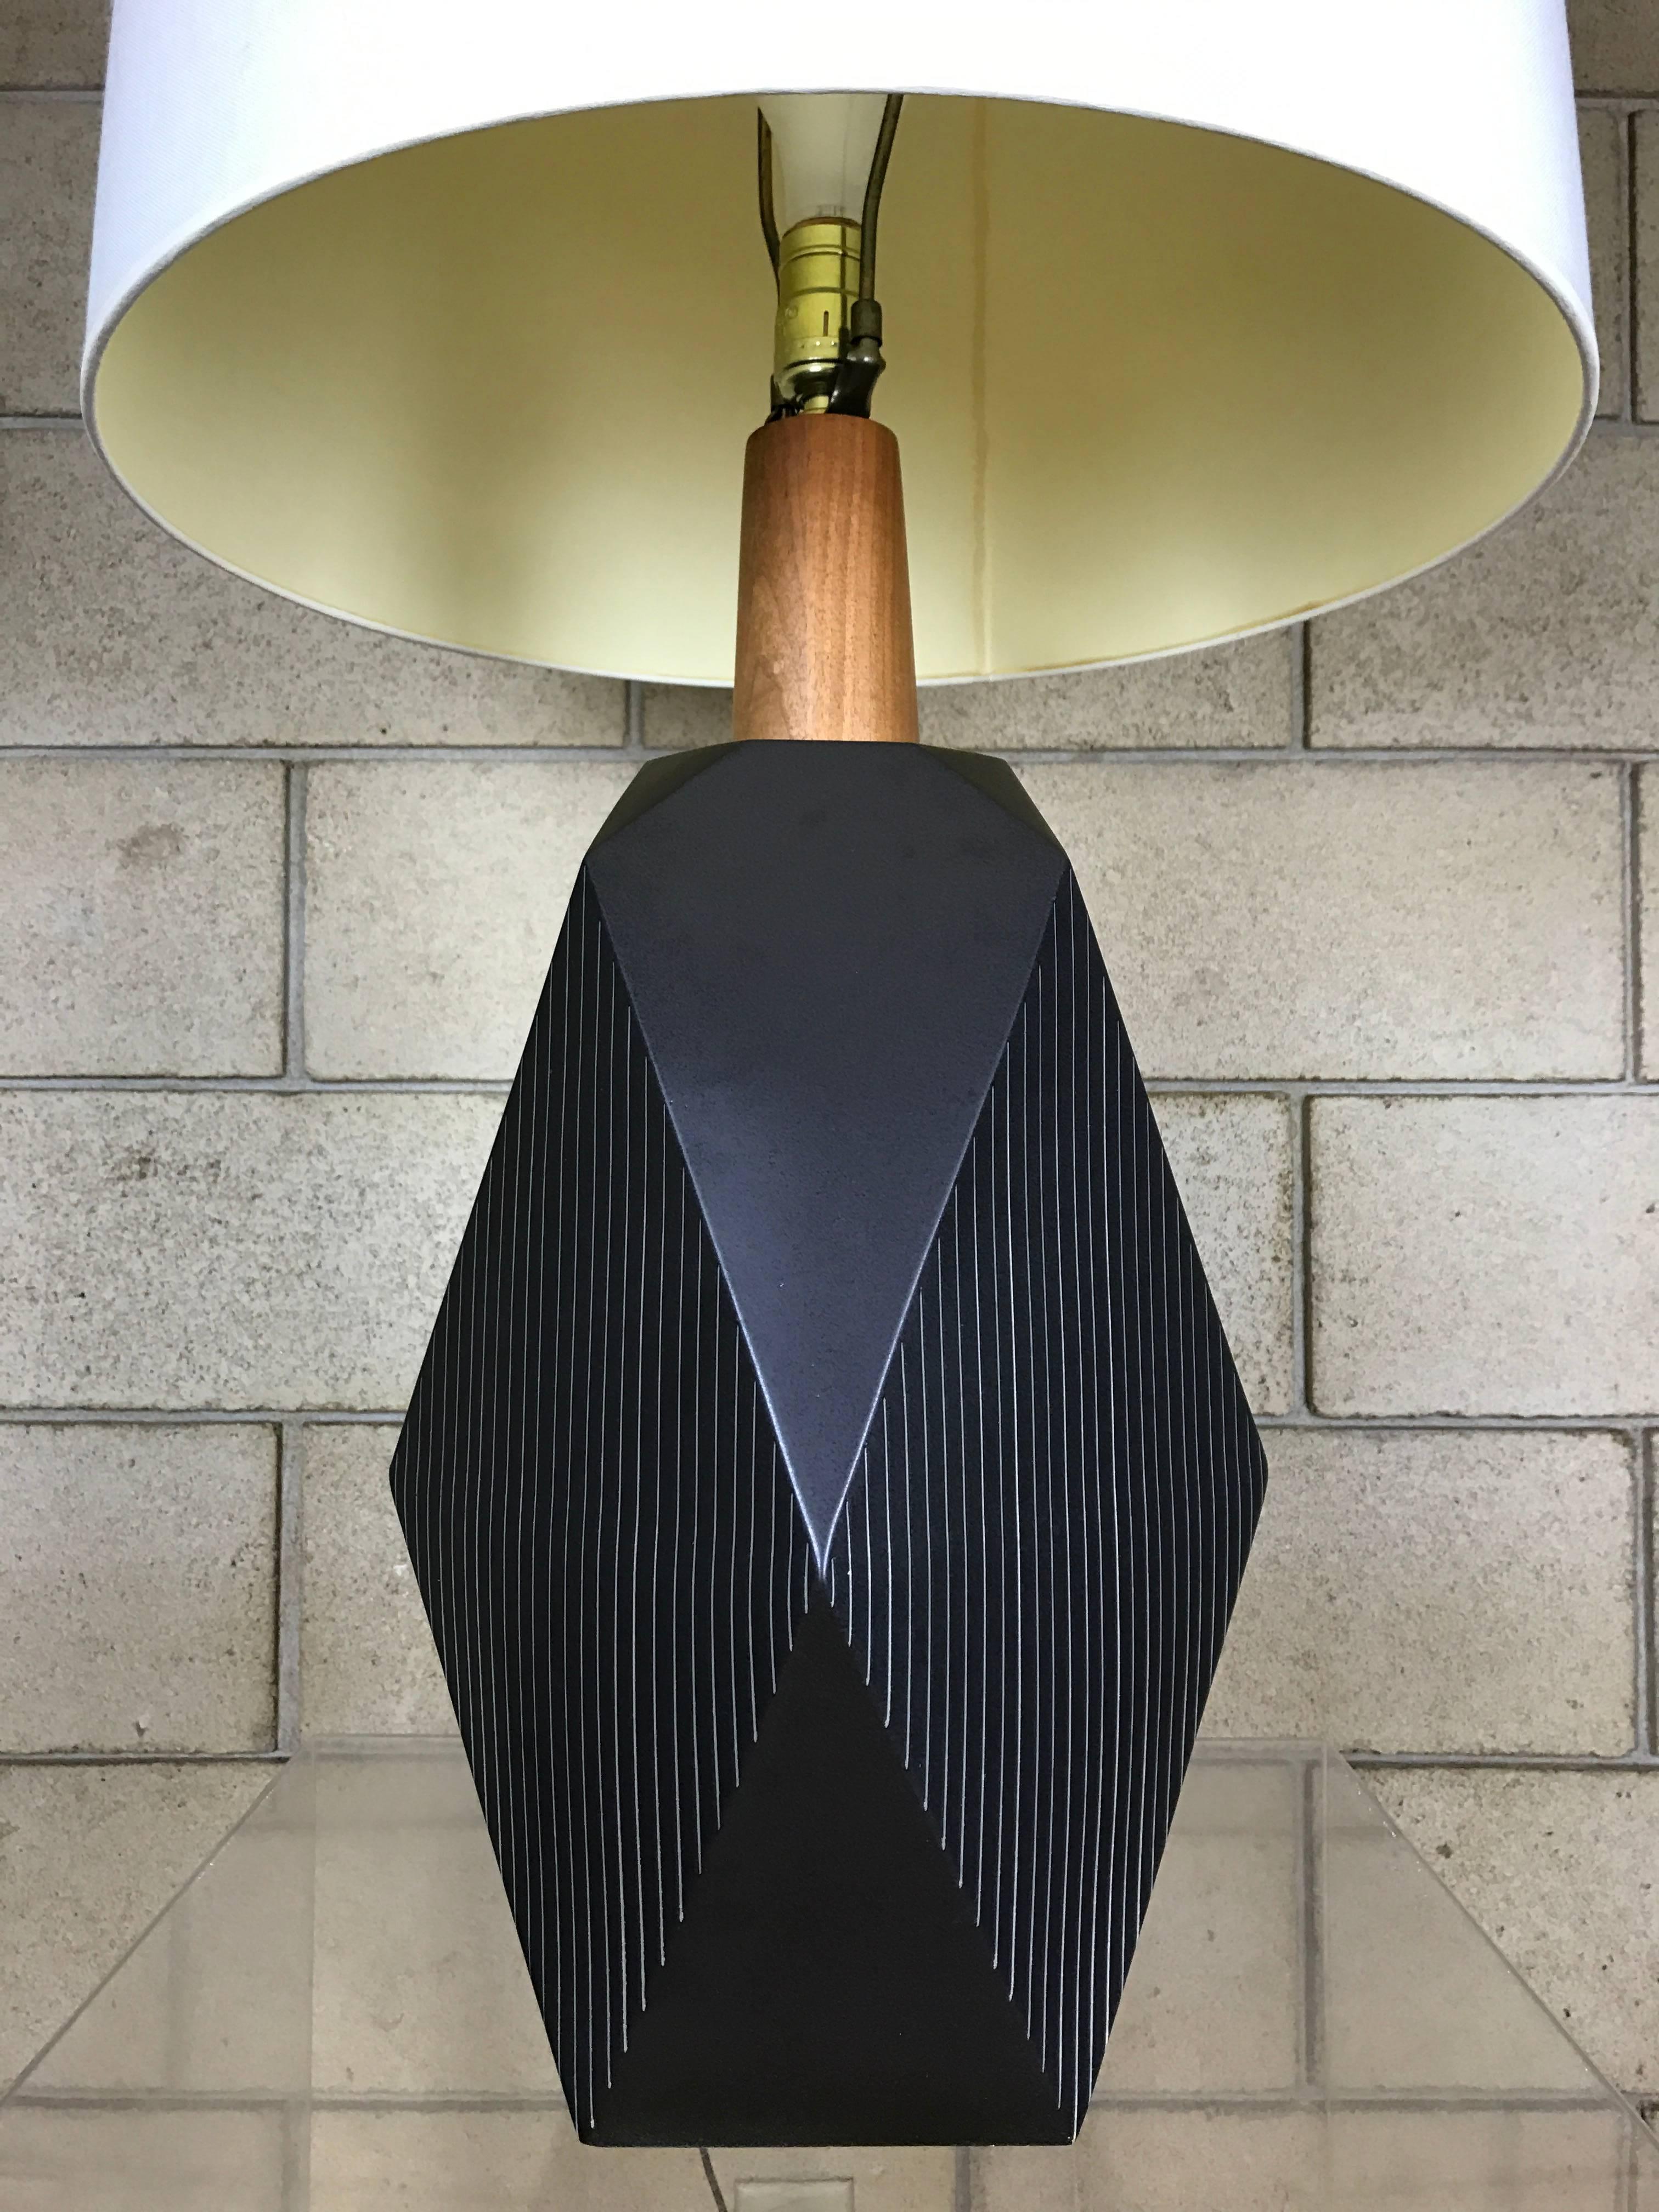 A stunning and rare geometric ceramic table lamp designed by Jane and Gordon March. Highly sought after by collectors and rarely offered for this price. Grab it. 

Base diameter 11".